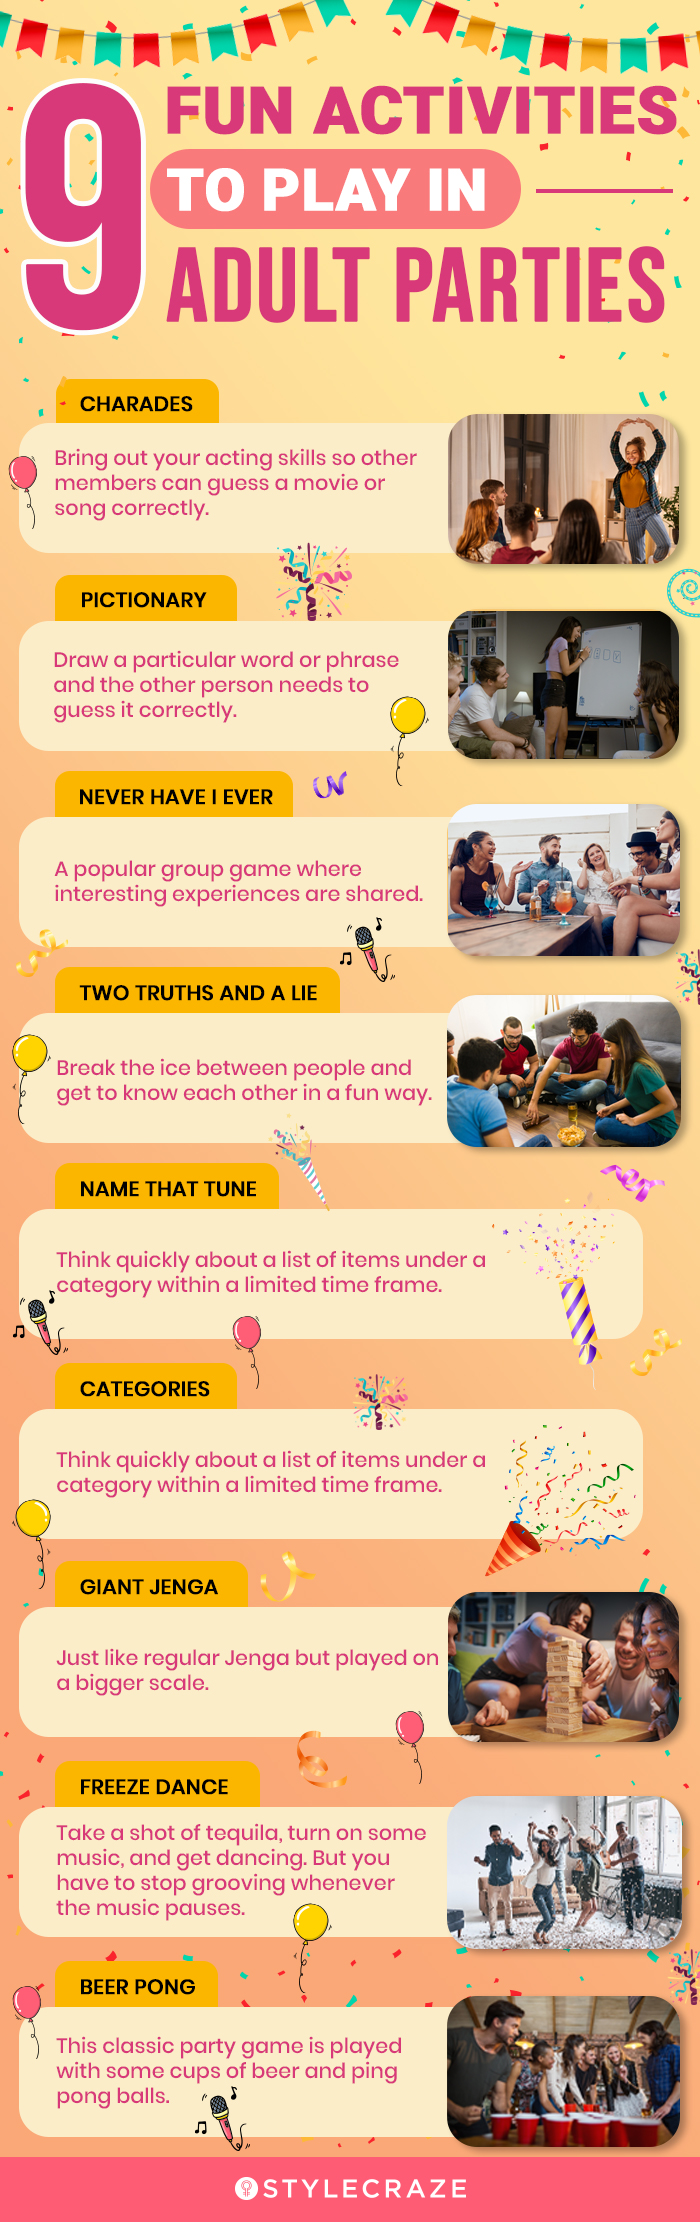 9 fun activities to play in adult parties [infographic]